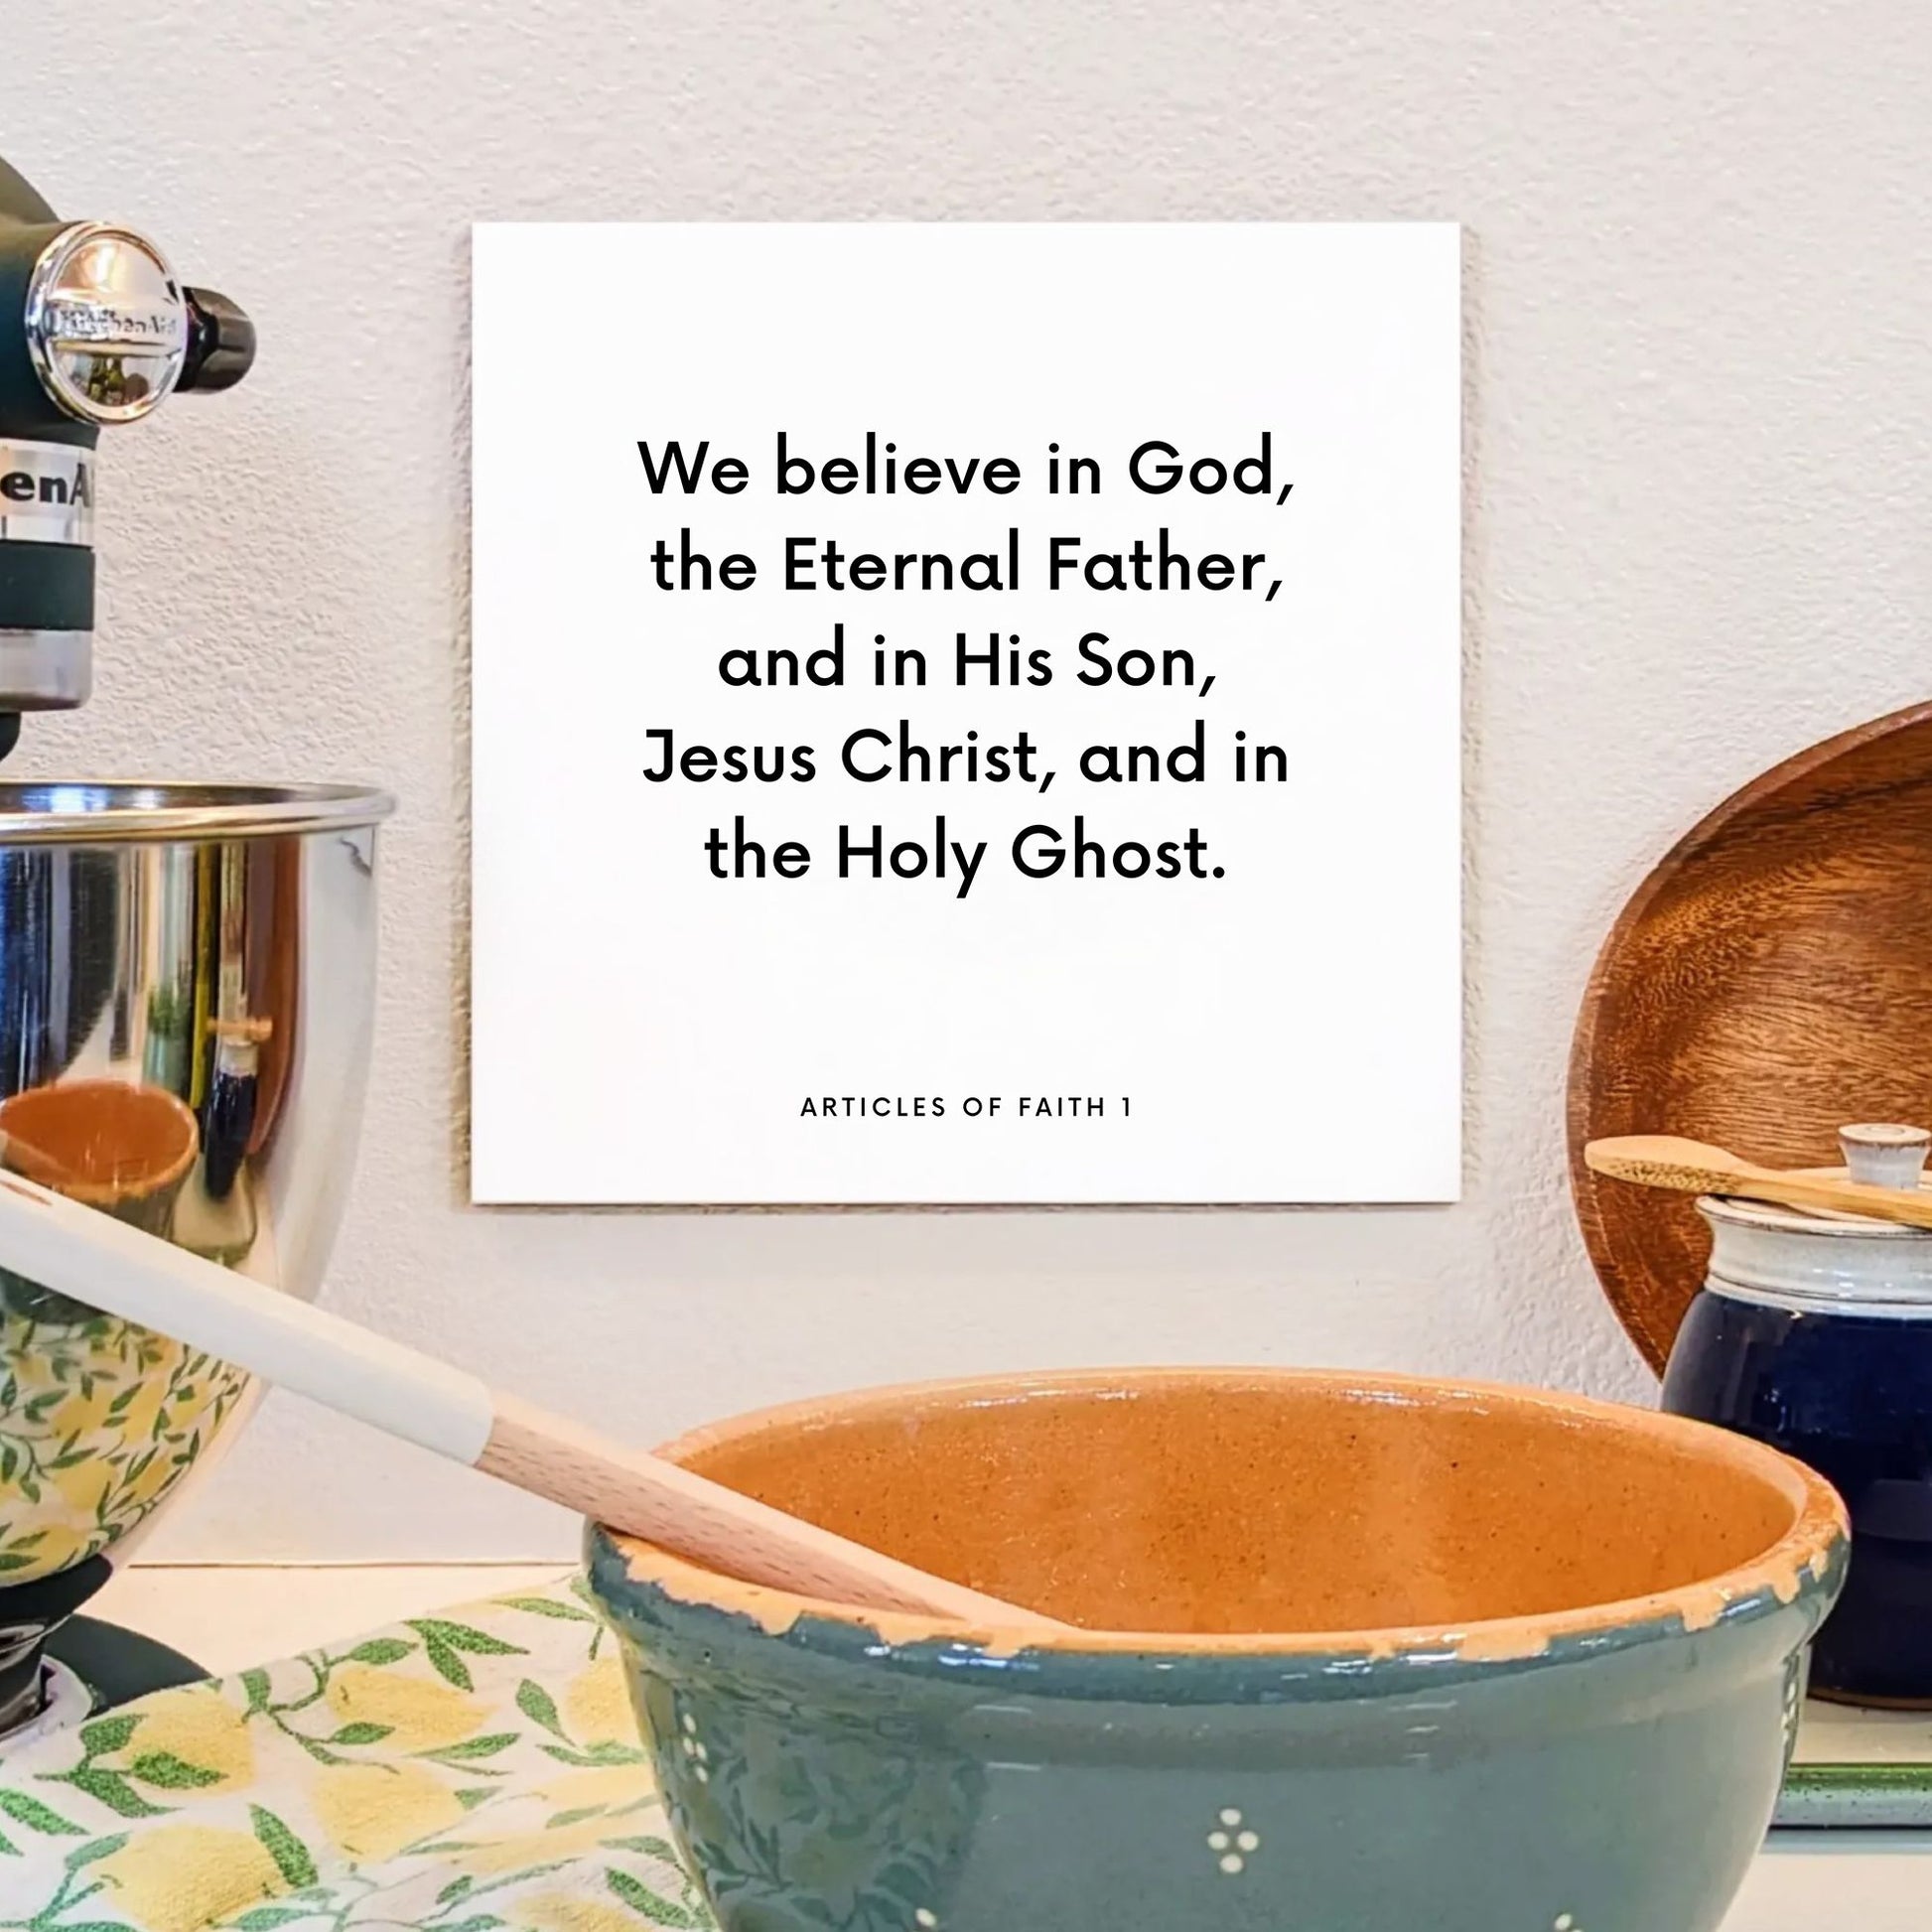 Kitchen mouting of the scripture tile for Articles of Faith 1 - "We believe in God, the Eternal Father"